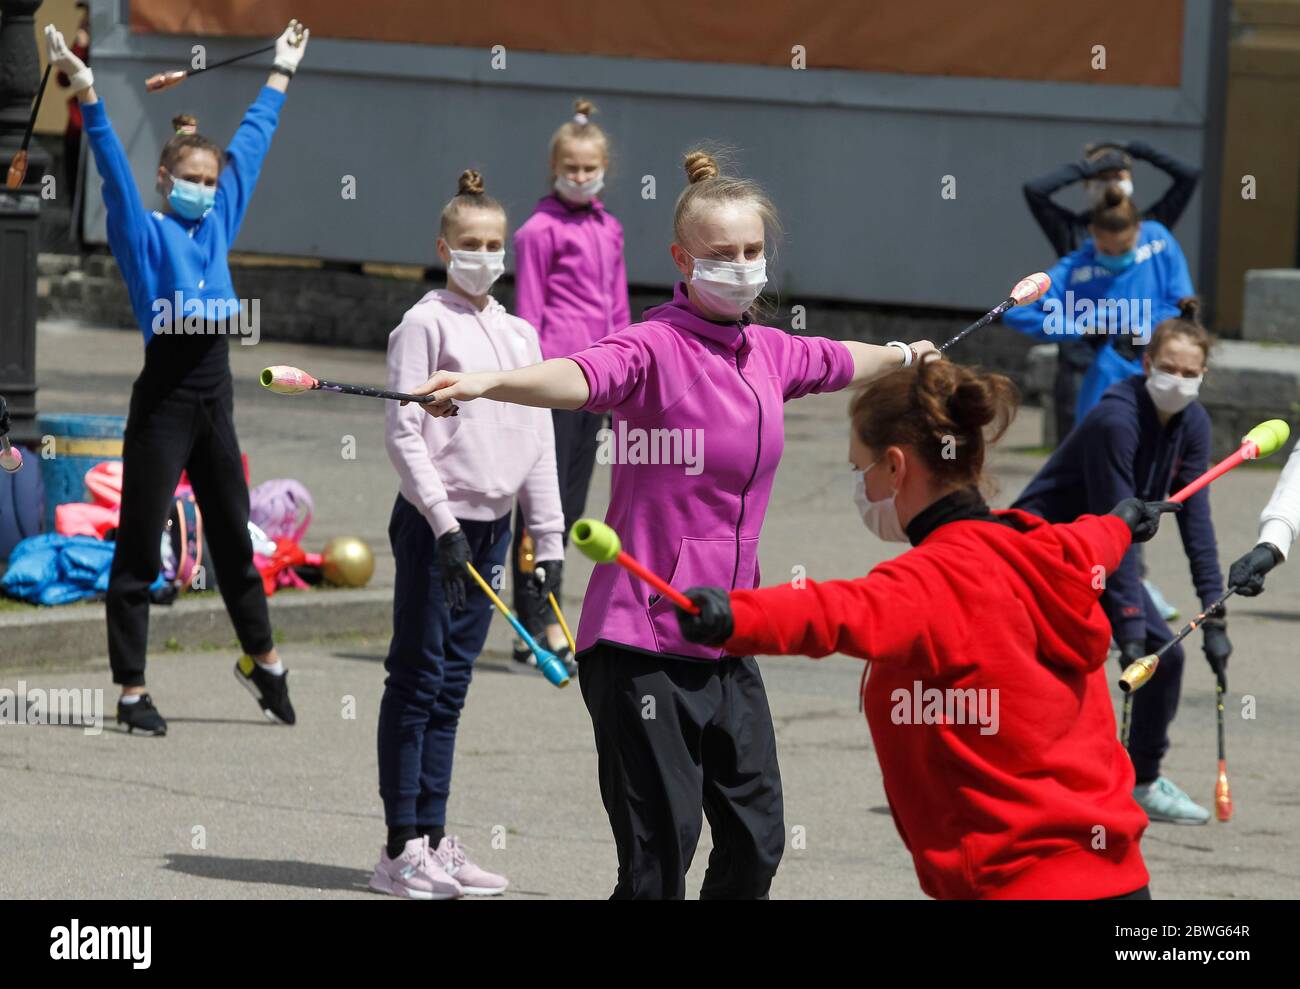 Gymnasts wearing face masks as a preventive measure against the spread of COVID-19 coronavirus perform during an open-air training session.Young gymnasts of Ukrainian Deriugina School staged an open-air training session to raise awareness on the situation of the Deriugina School with no building for training, because the rental agreement for the club's training facility expired. The Deriugina School is known rhythmic gymnastics club by the former world champion Irina Deriugina, her coach and mom Albina Deriugina. Irina Deriugina is a former Soviet individual rhythmic gymnast from Ukraine and U Stock Photo